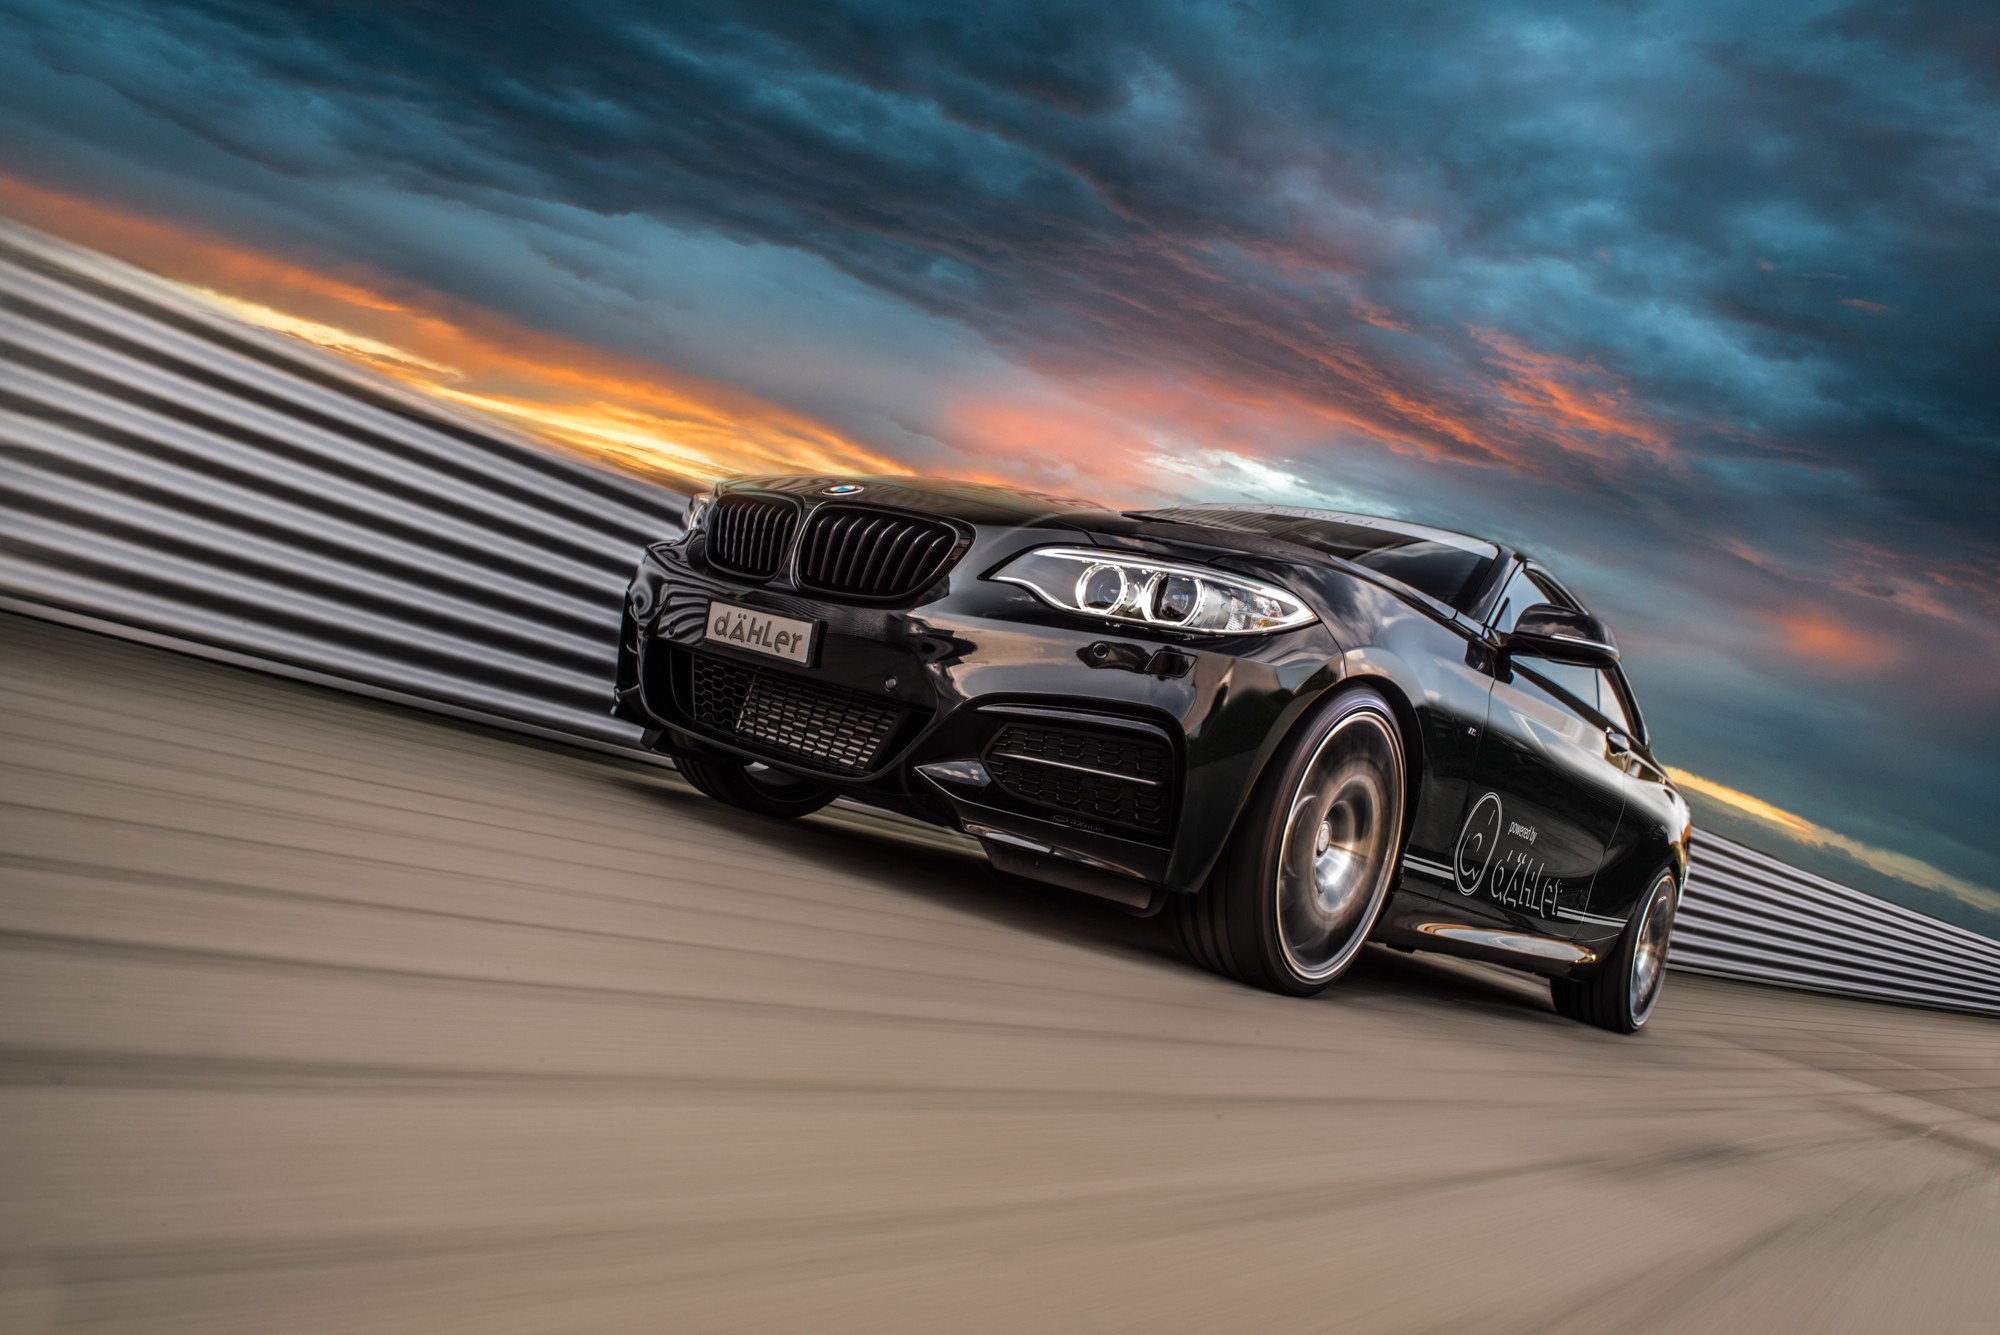 Daehler Tuned Bmw M235i Makes 390 Hp And Has M4 Rivaling Acceleration Time Autoevolution